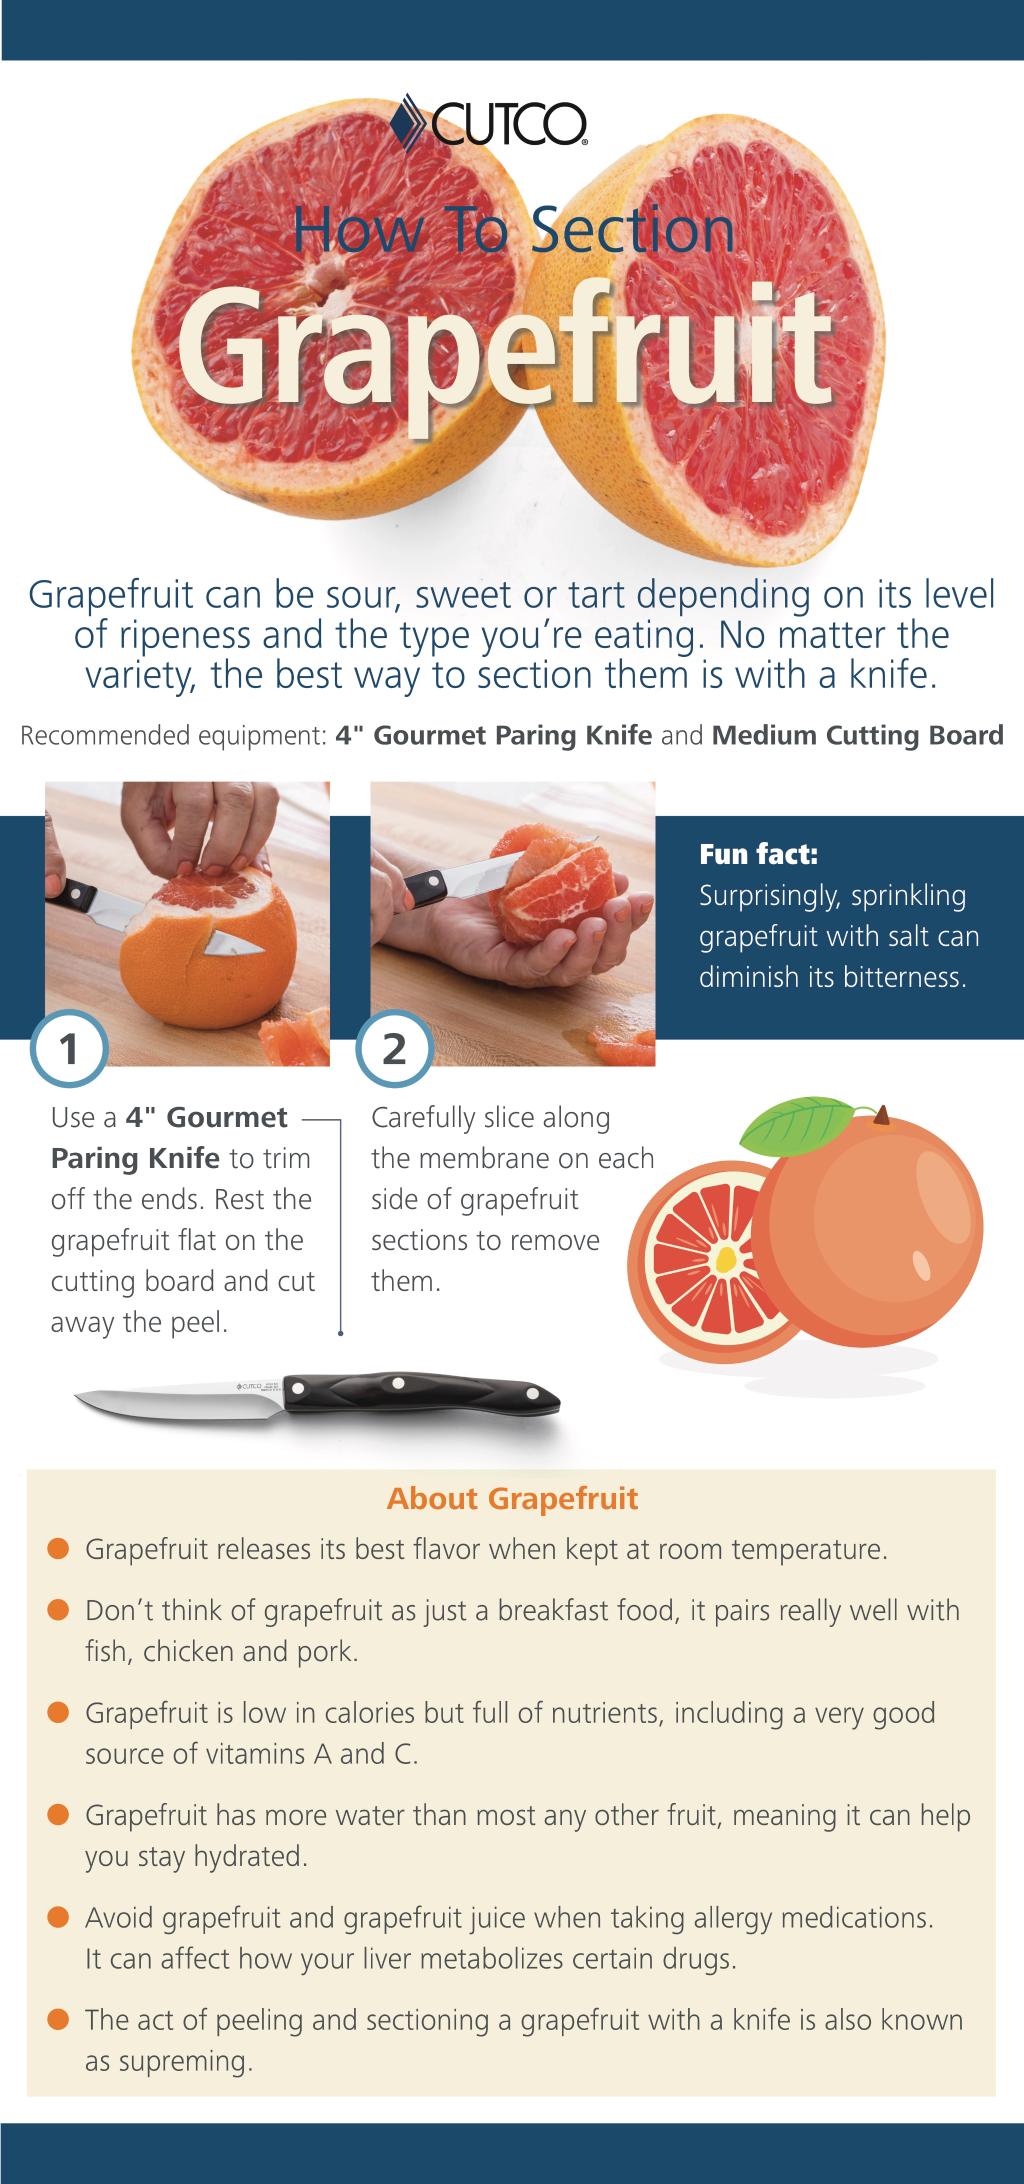 How to Cut a Grapefruit with a Grapefruit Knife